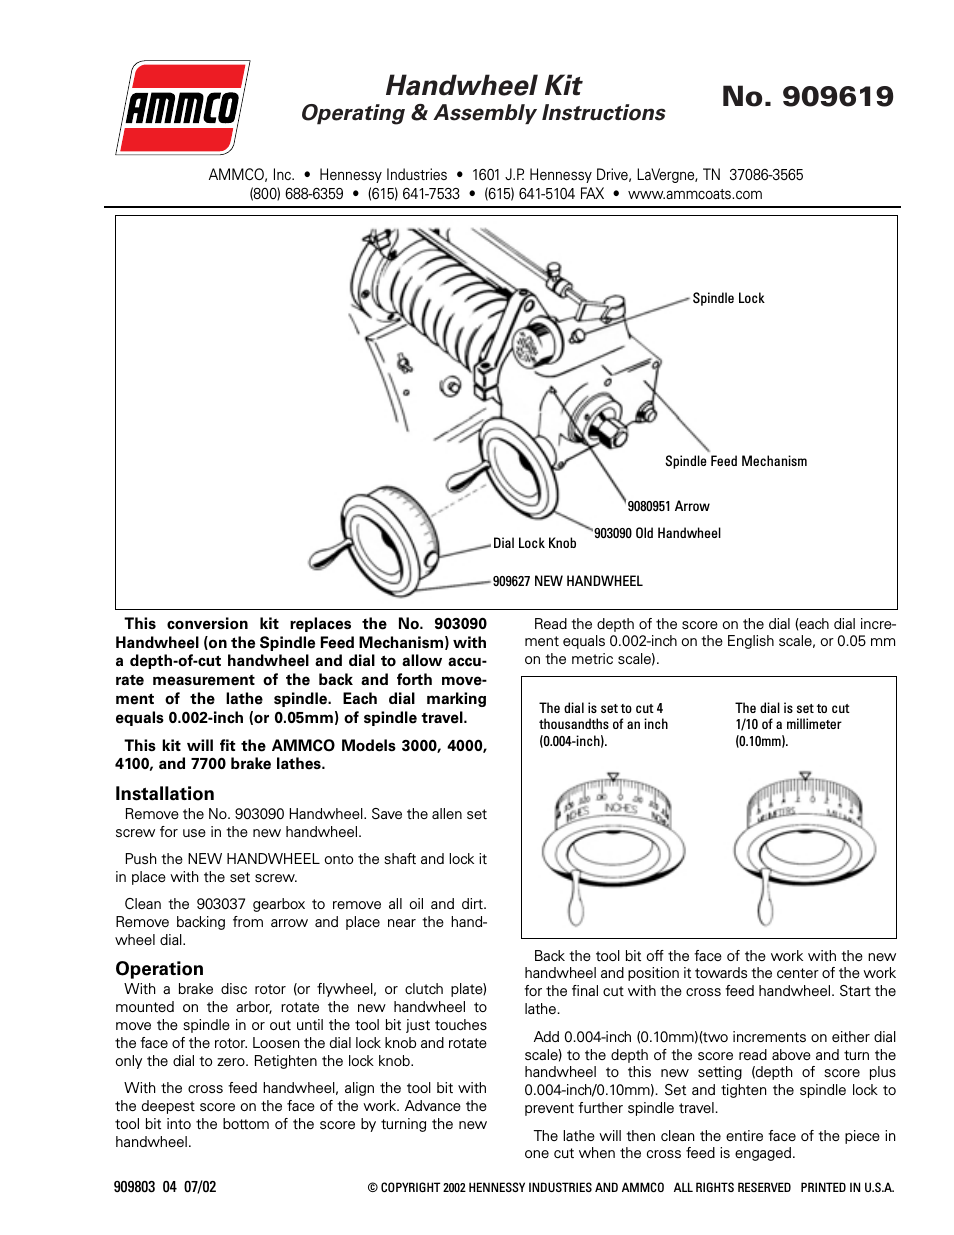 Handwheel Kit Operating and Assembly